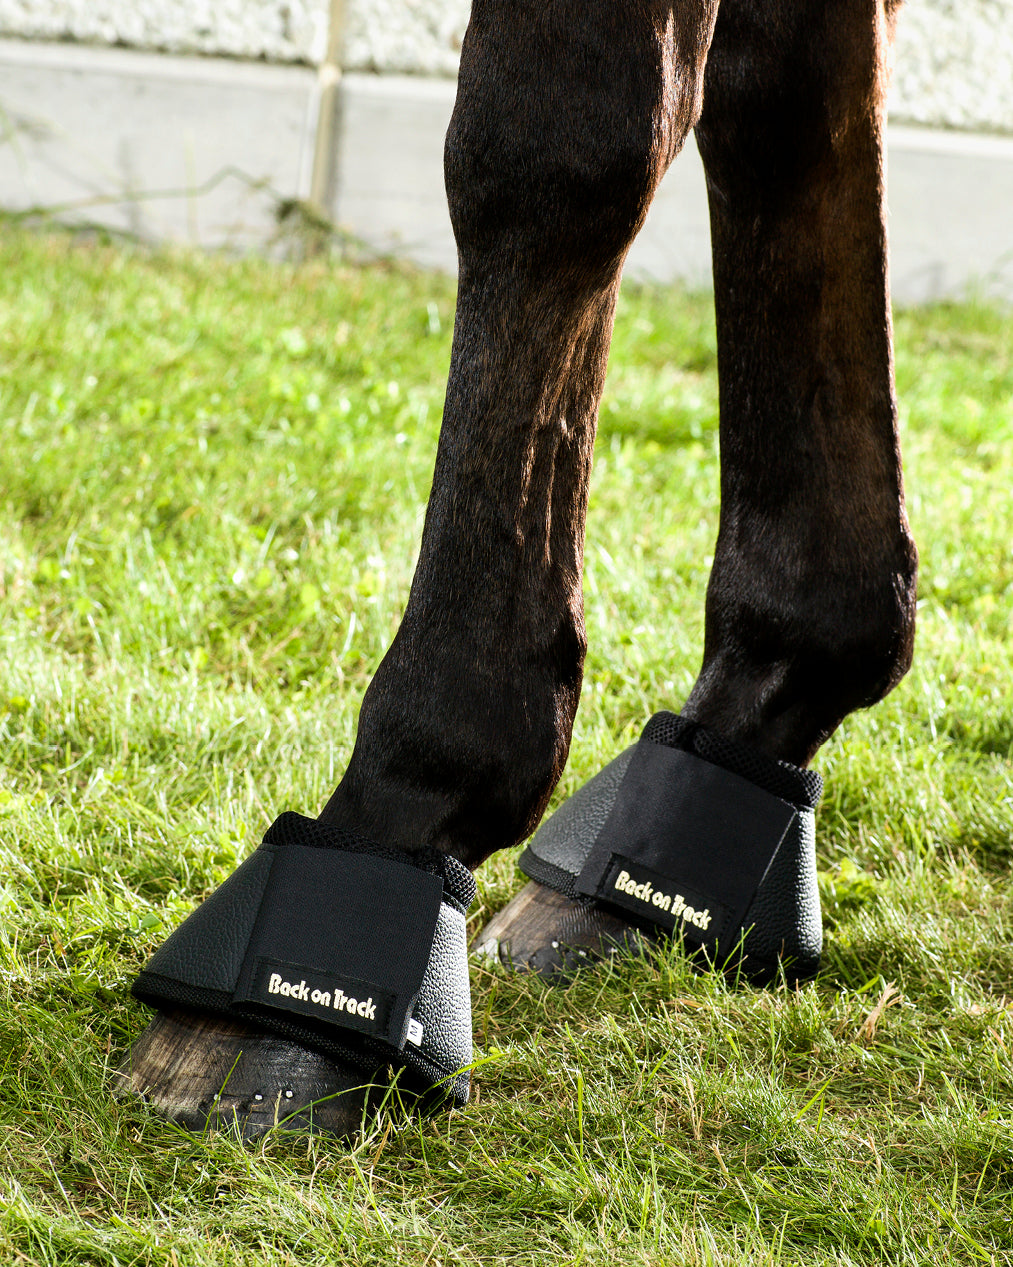 louis vuitton bell boots for horses